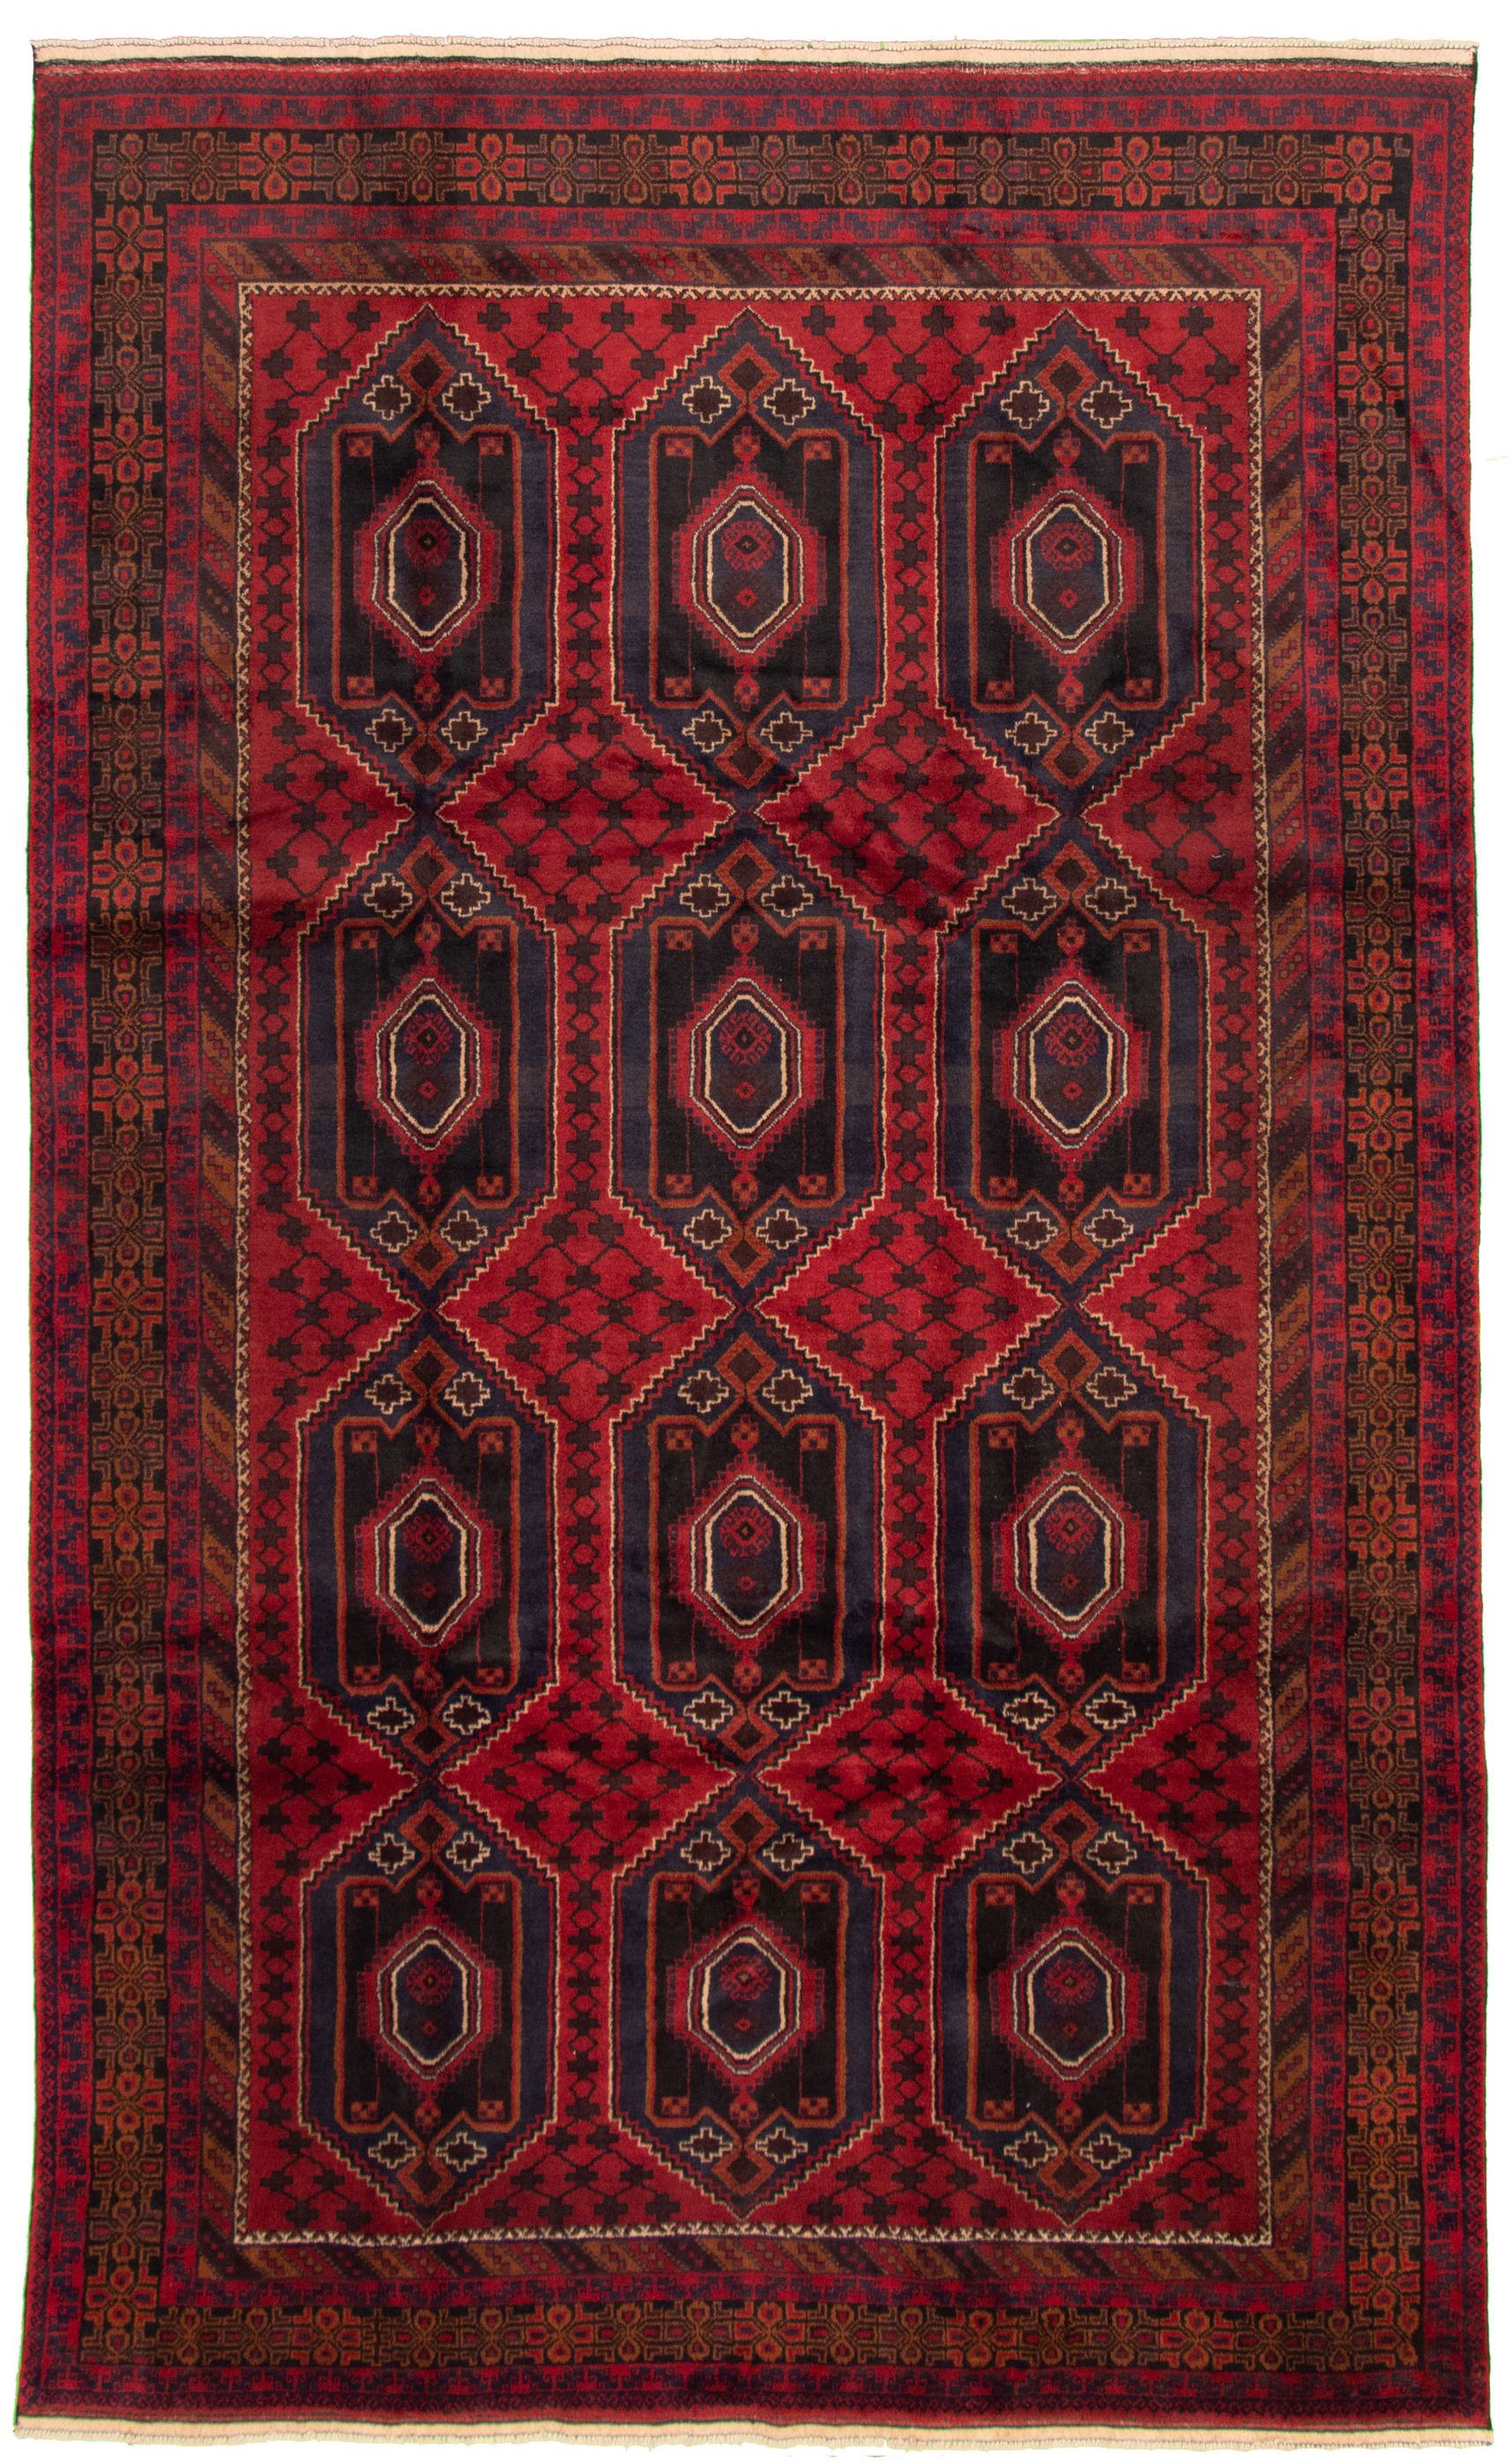 Hand-knotted Rizbaft Red Wool Rug 7'2" x 11'9" Size: 7'2" x 11'9"  